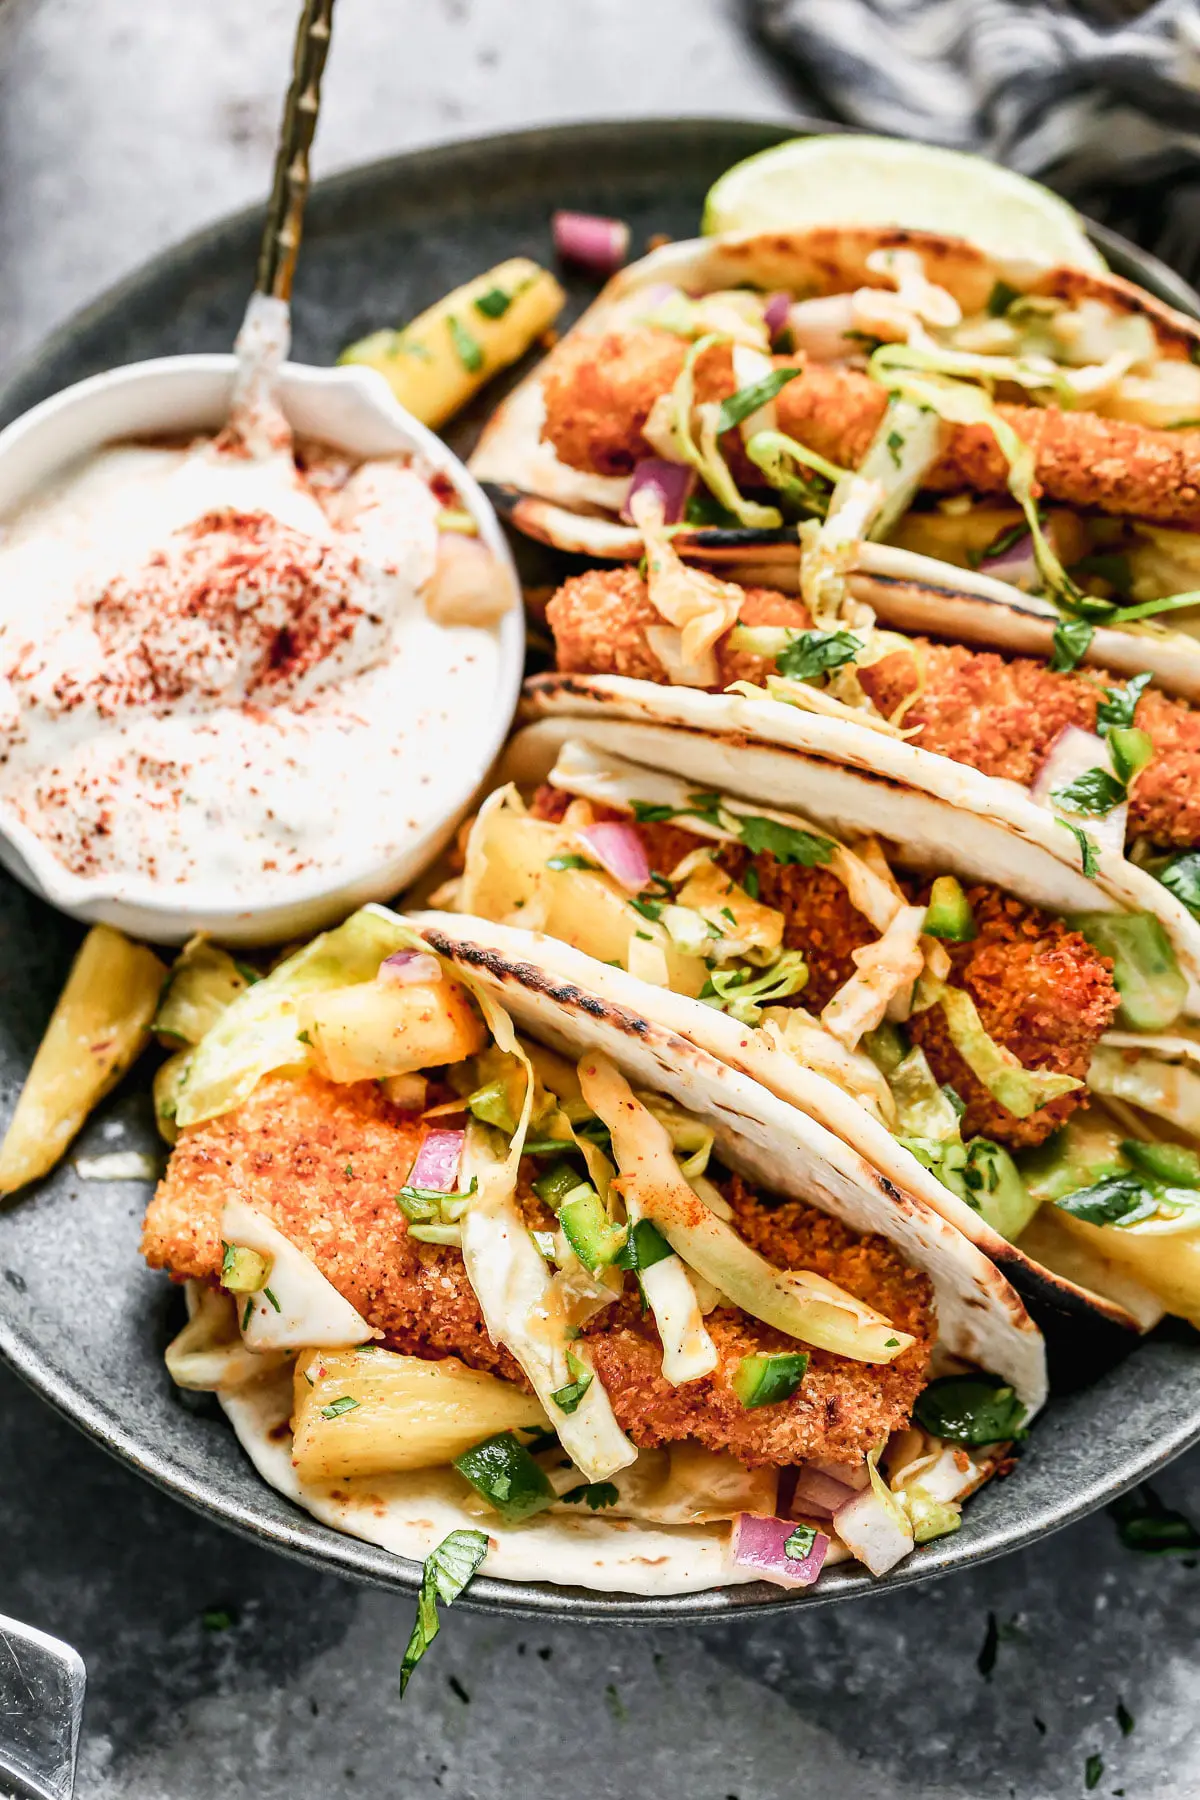 Never have a soggy fish taco again! Our Air Fryer Fish Tacos produce the CRISPIEST breaded fish without all the fat and calories and WITH all the flavor. We nestle the crunchy barramundi&nbsp;in charred street taco tortillas, top with a quick pineapple slaw, and a fresh squeeze of lime juice.&nbsp;